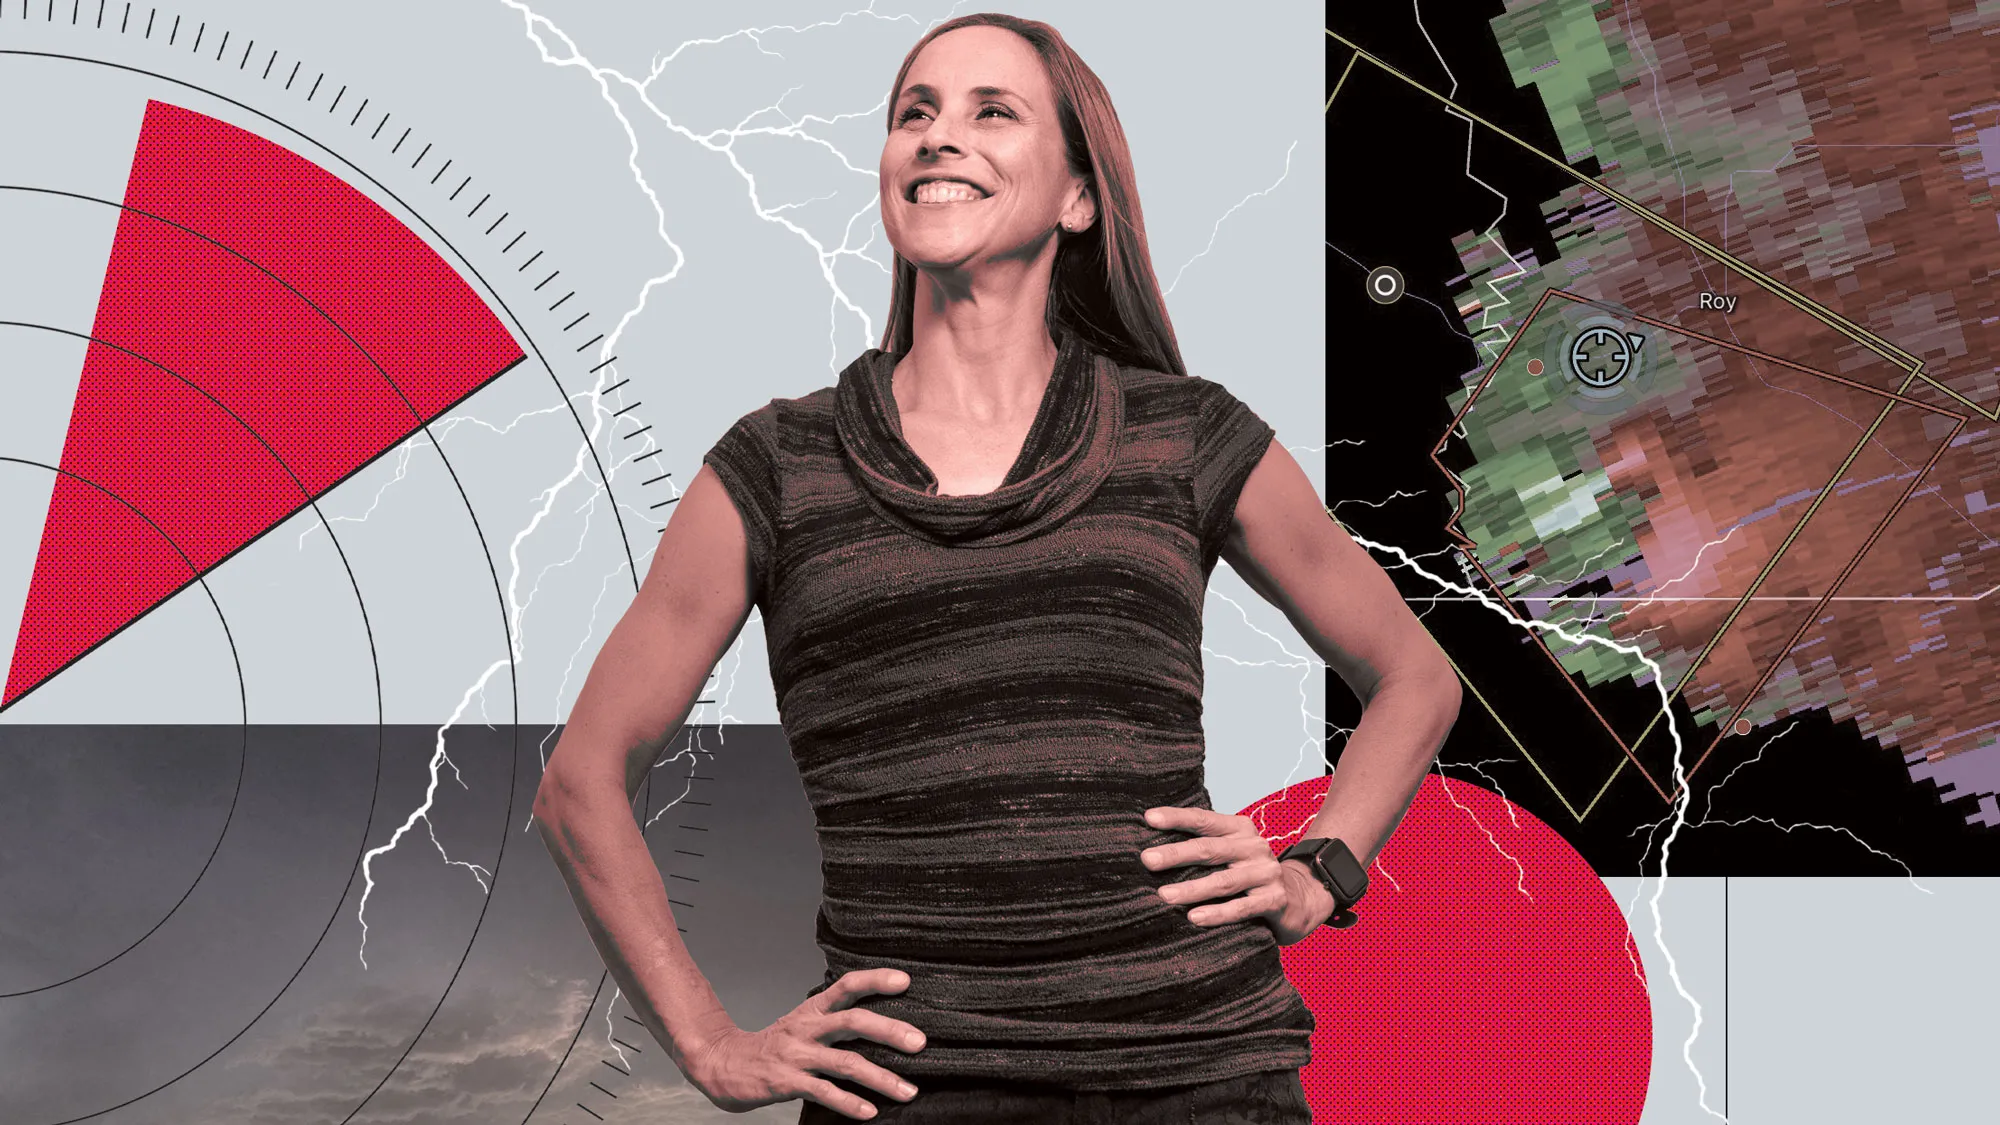 Jana Houser, a white woman with her straight hair pushed behind her shoulders, grins as she looks up and stands confidently with her hands on hips. In an illustrated background to her image are radar images and photos of storms, colored in shades of Ohio State’s scarlet and gray. 